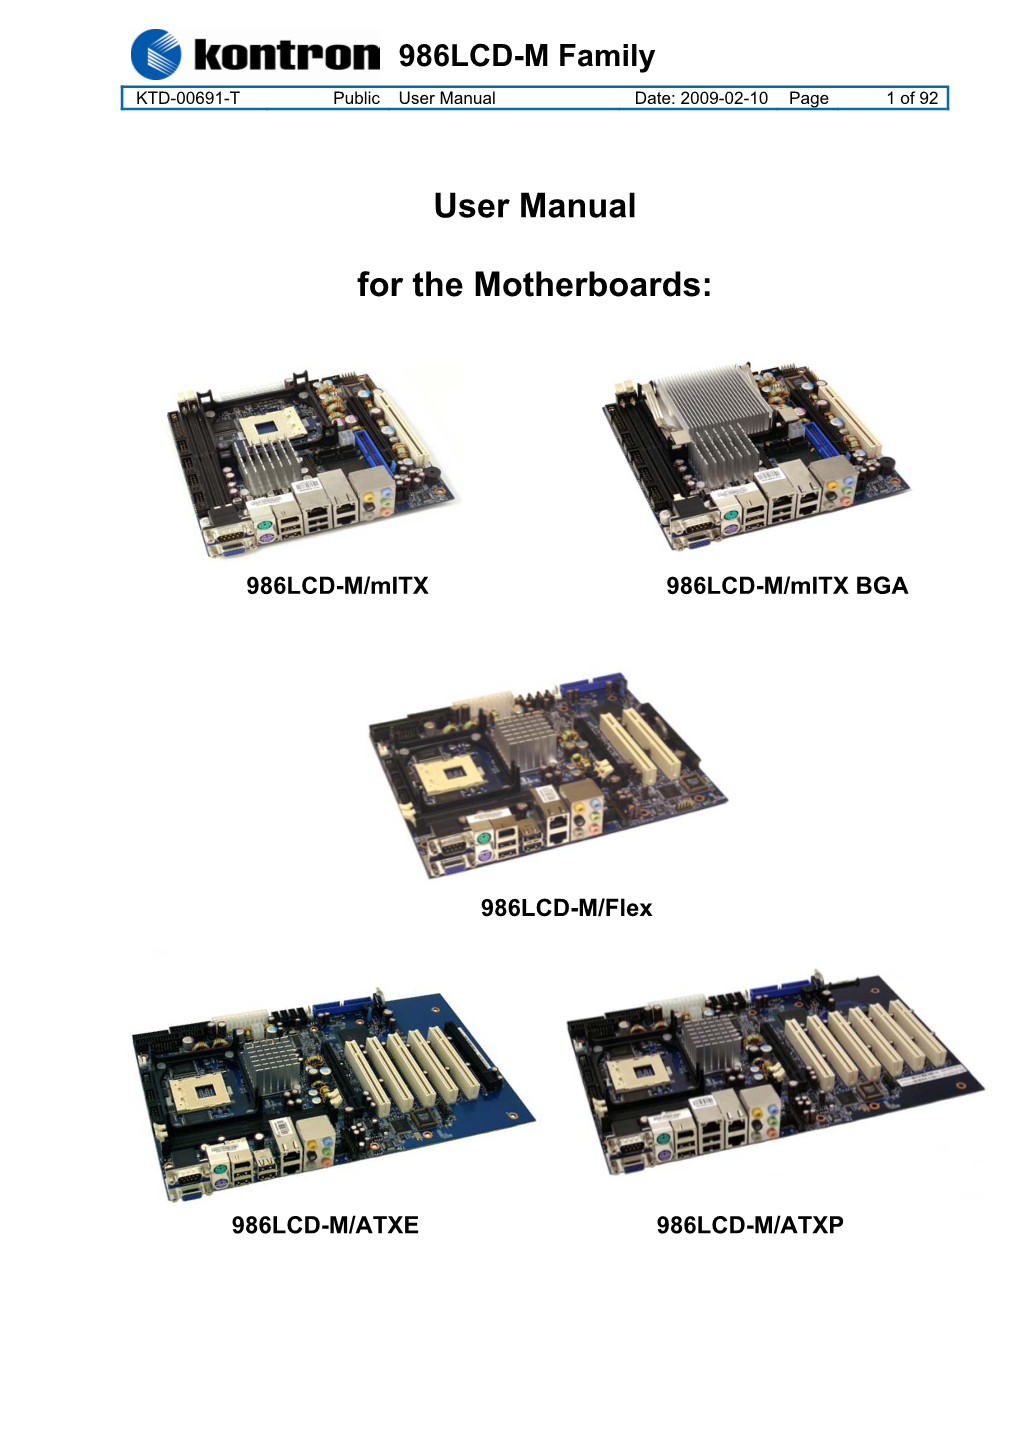 User Manual for the Motherboards